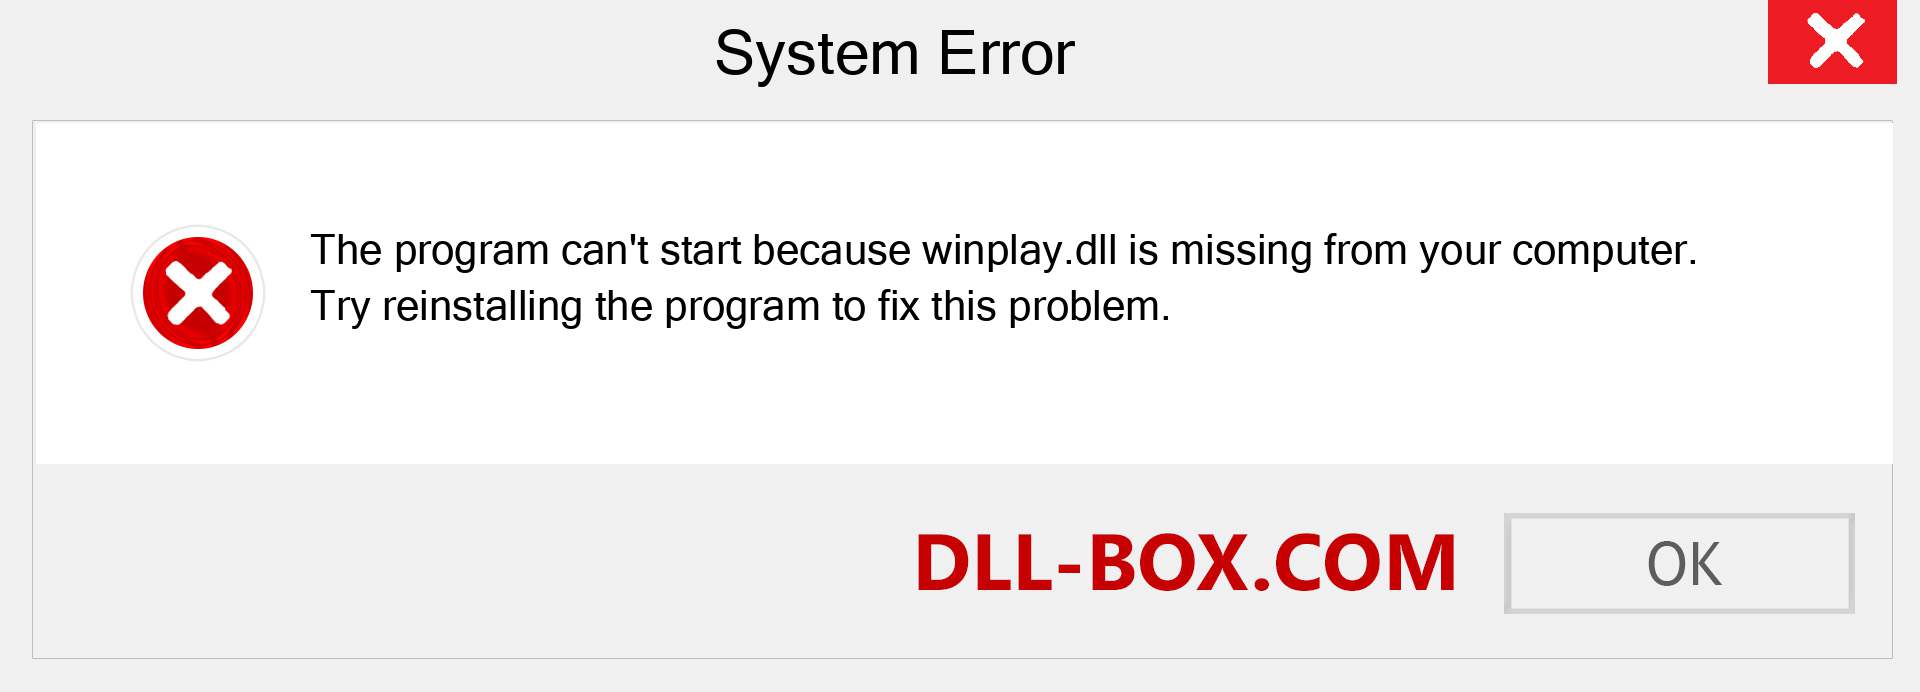  winplay.dll file is missing?. Download for Windows 7, 8, 10 - Fix  winplay dll Missing Error on Windows, photos, images